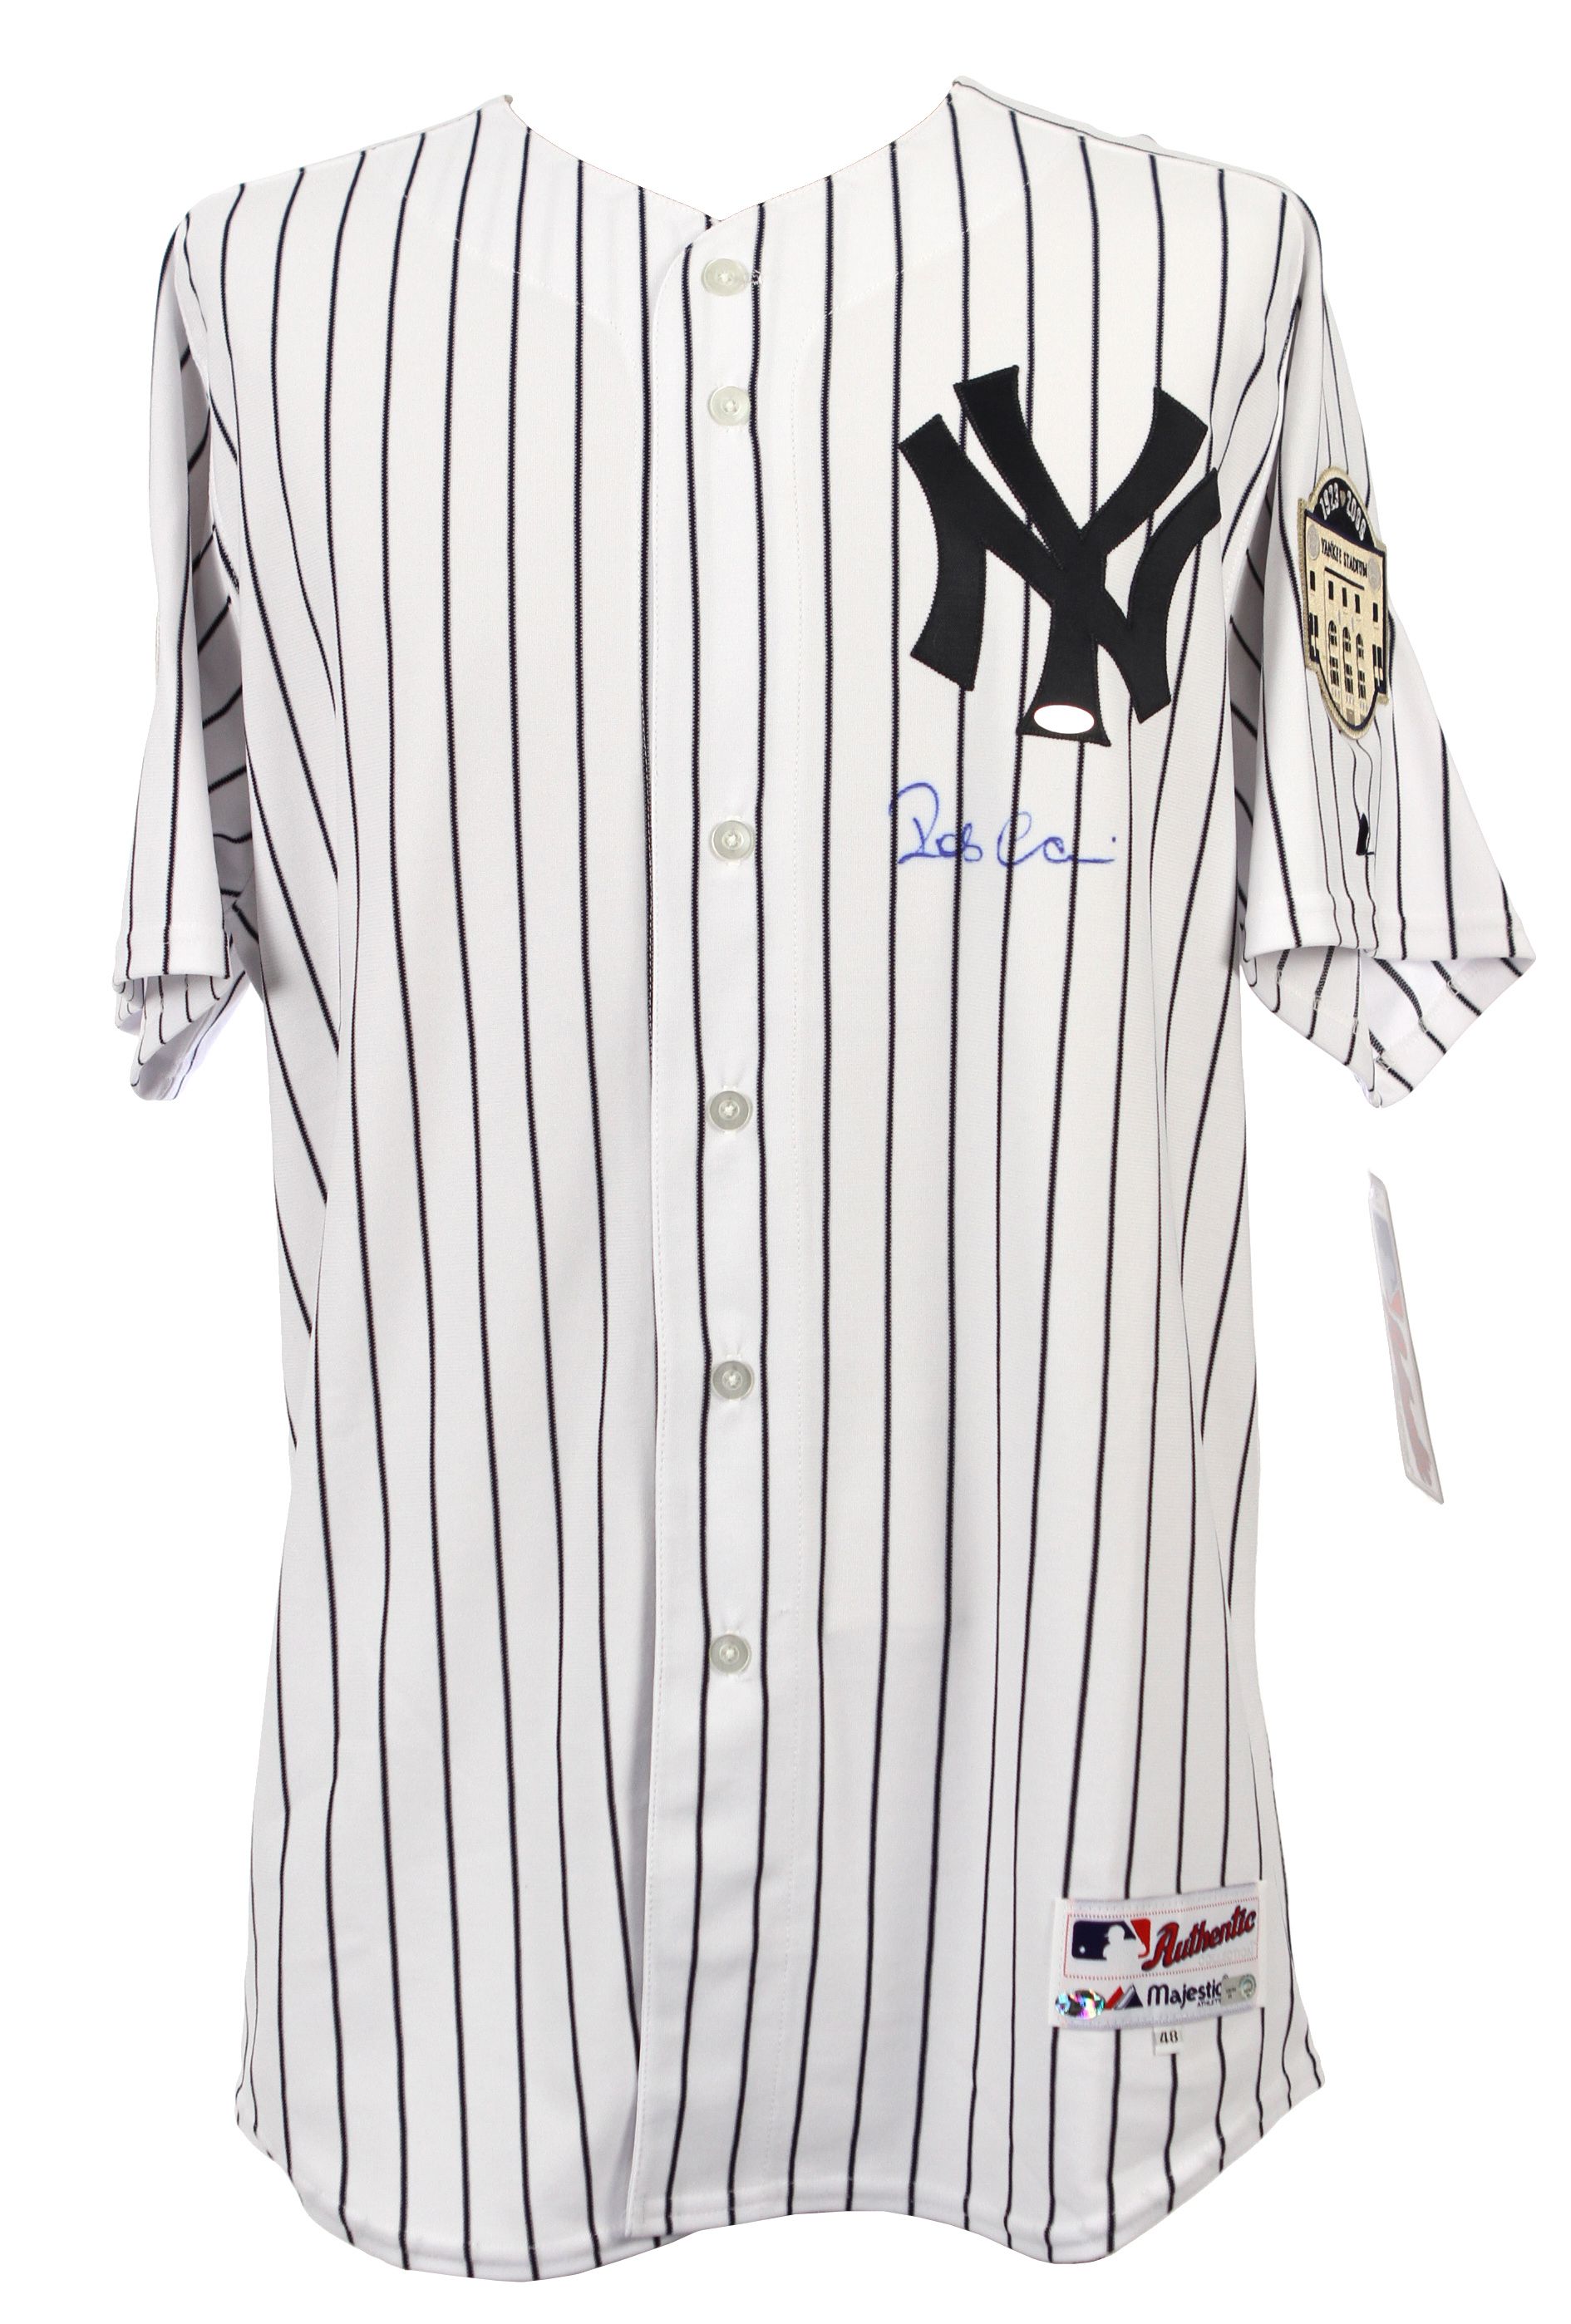 Lot Detail - 2008 Robinson Cano New York Yankees Signed Jersey w